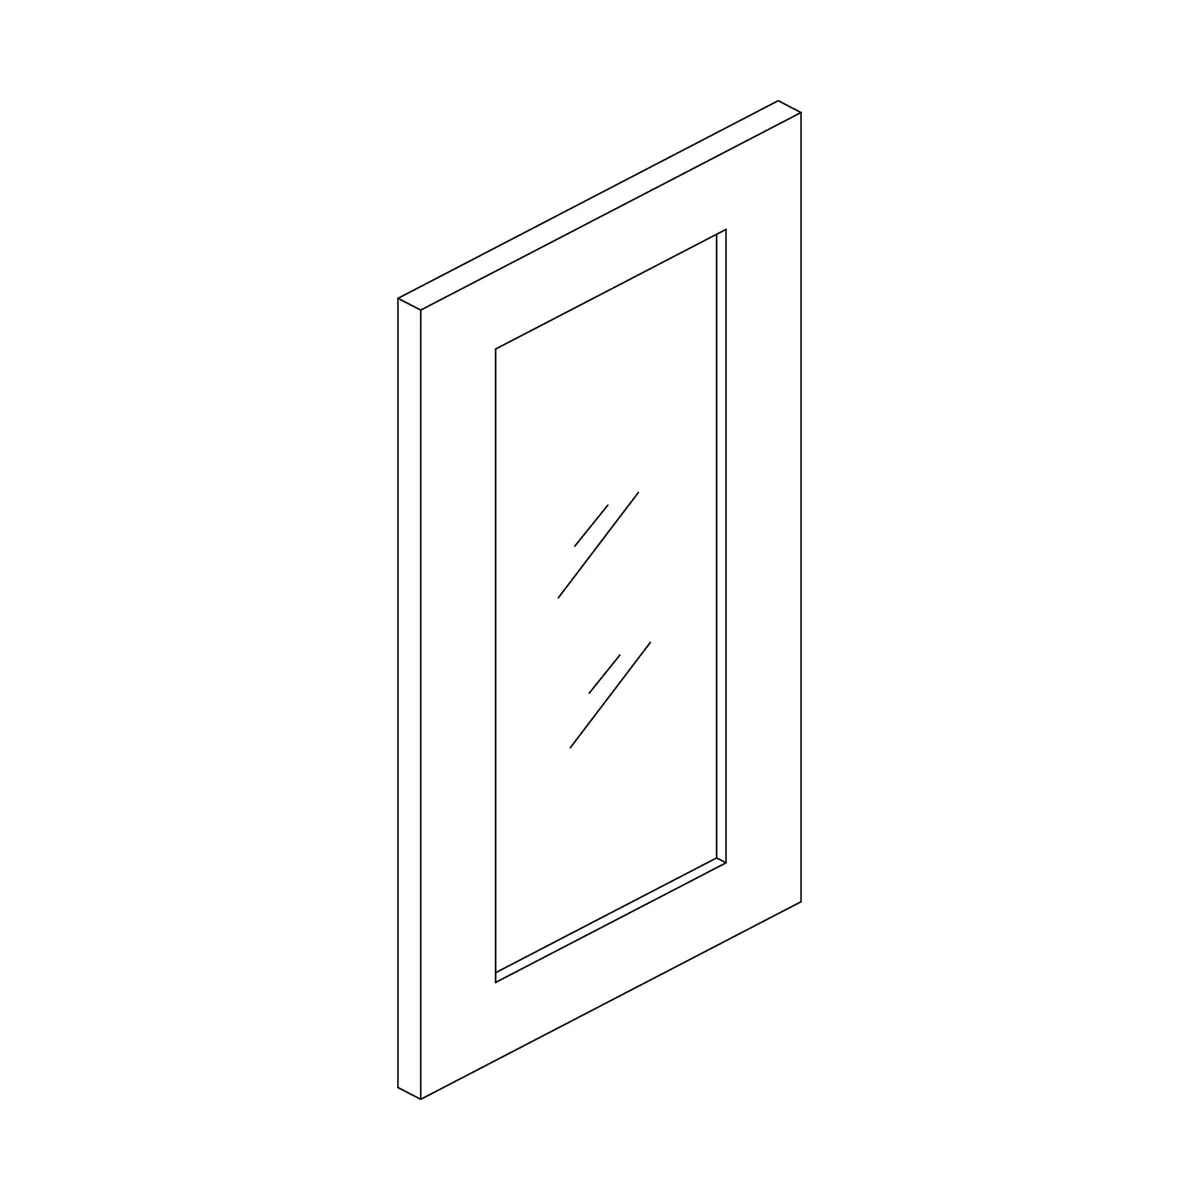 Craft Cabinetry Recessed Panel Gray Stain 14.5”W x 29”H Glass Door for W1530 Image Specifications